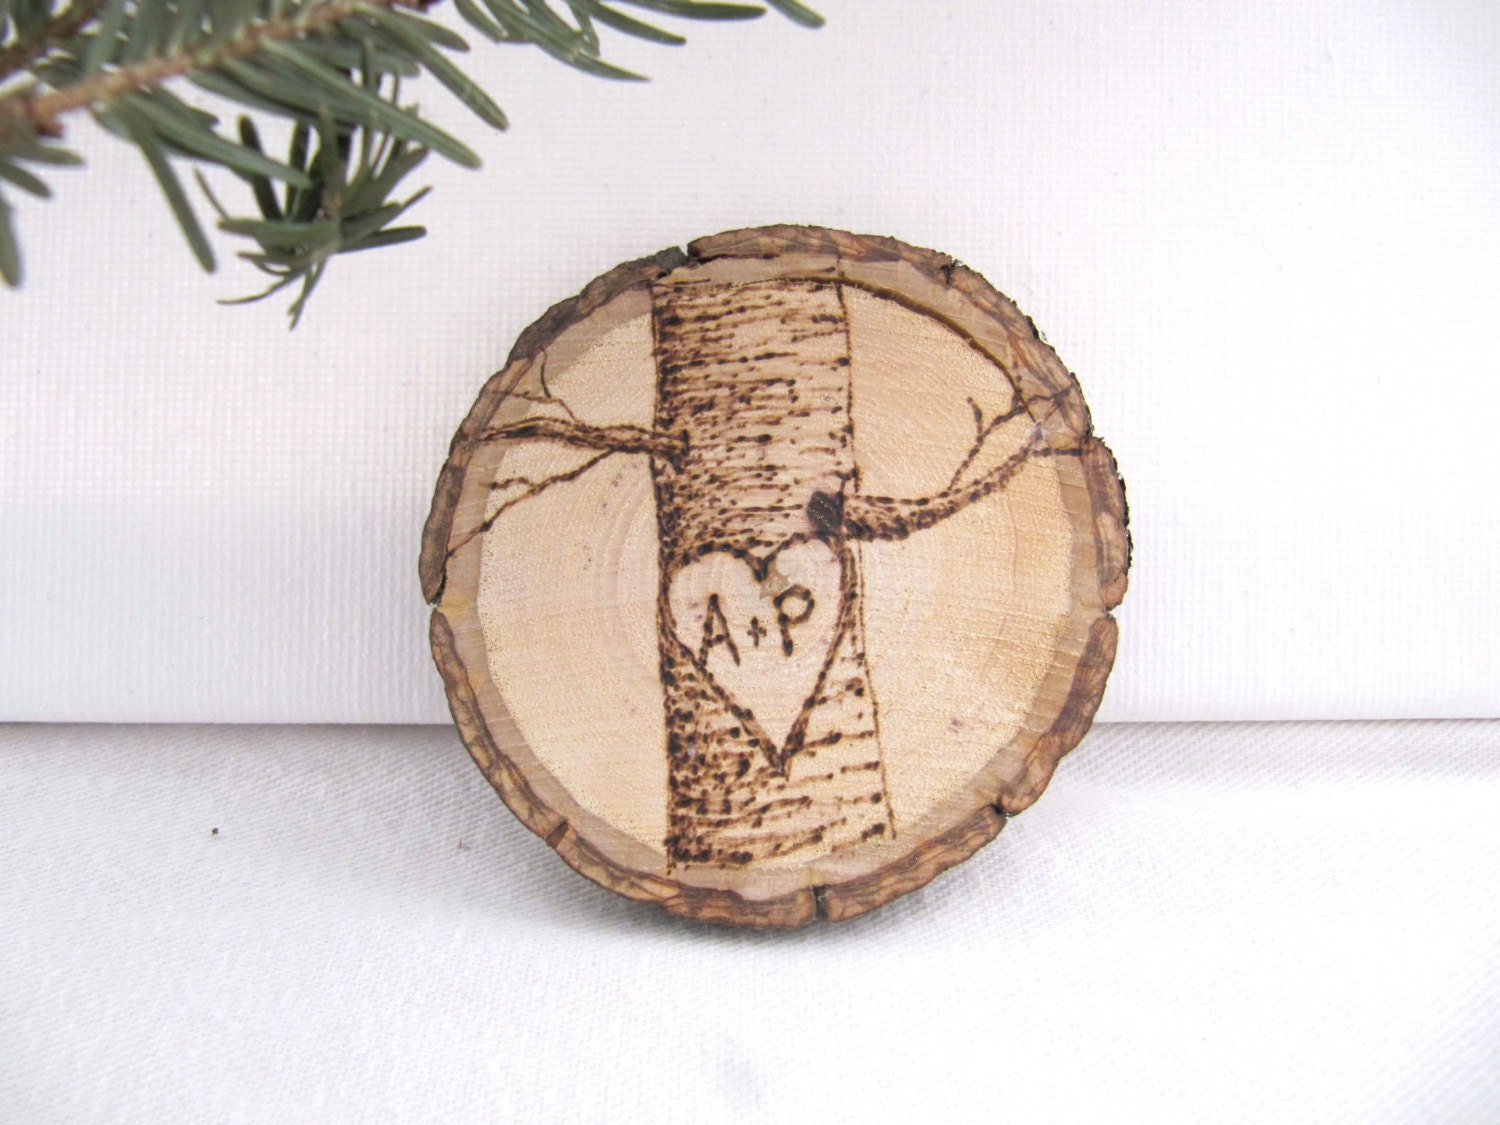 Wood Burned Pyrography Customized Initials in Tree Magnet Ornament - vermontpaul